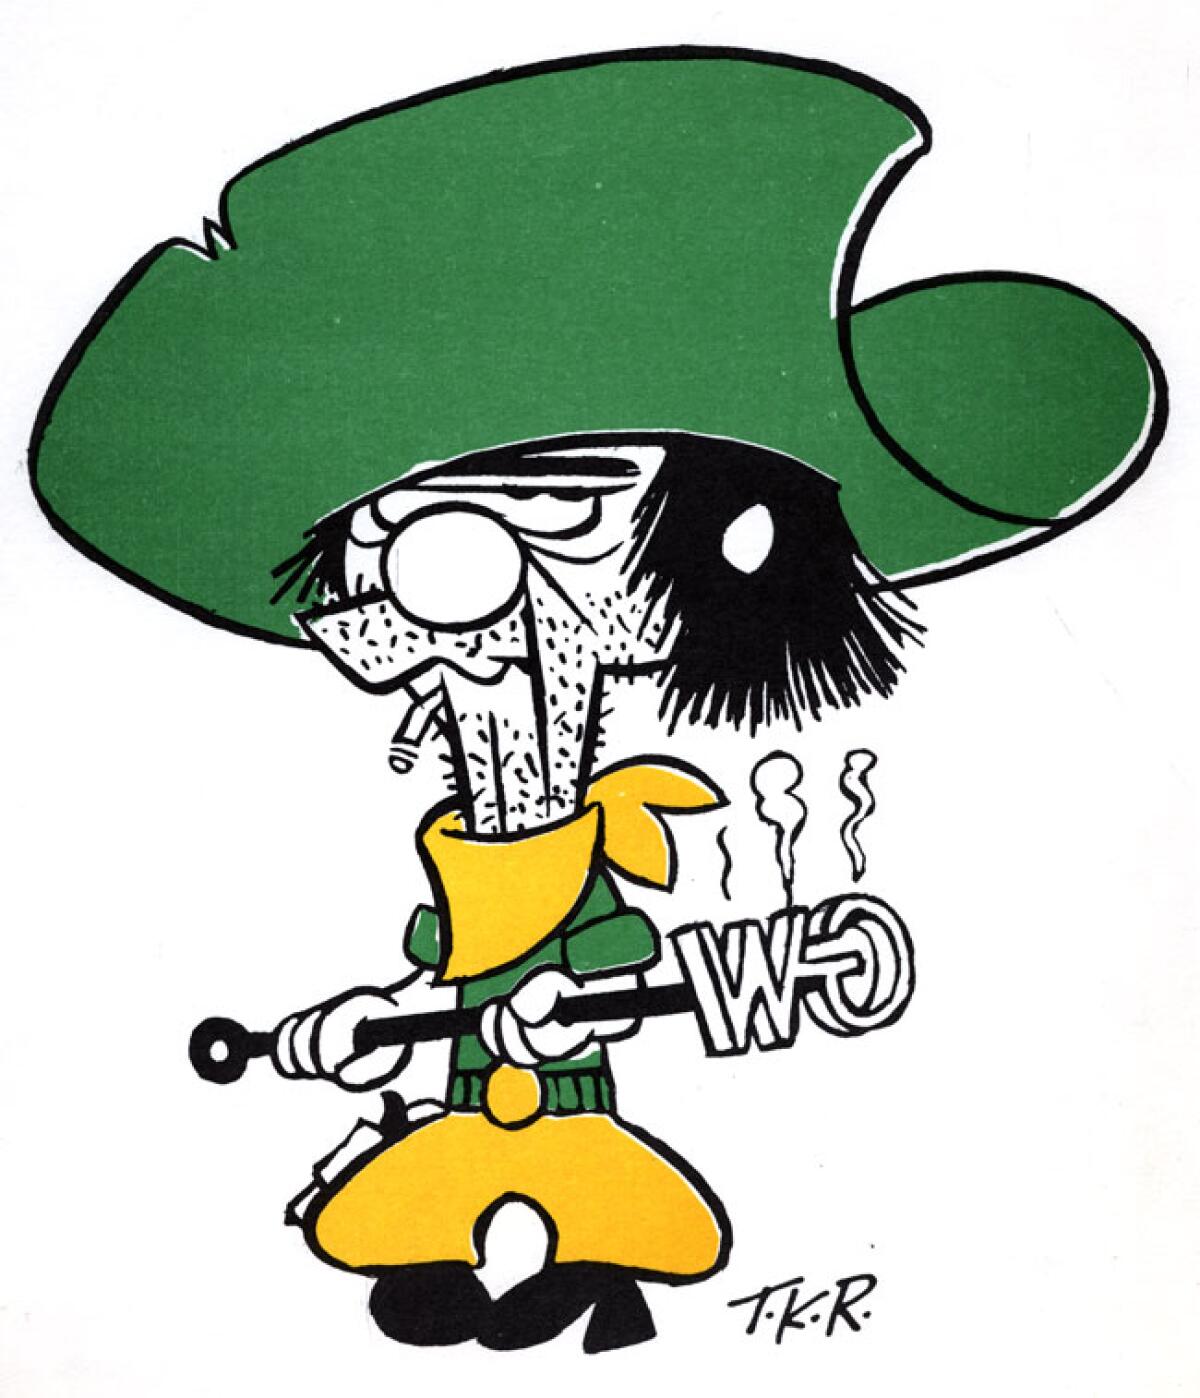 The original Rustler Sam mascot was designed for the college in 1968 by a popular cartoonist named Tom J. Ryan.